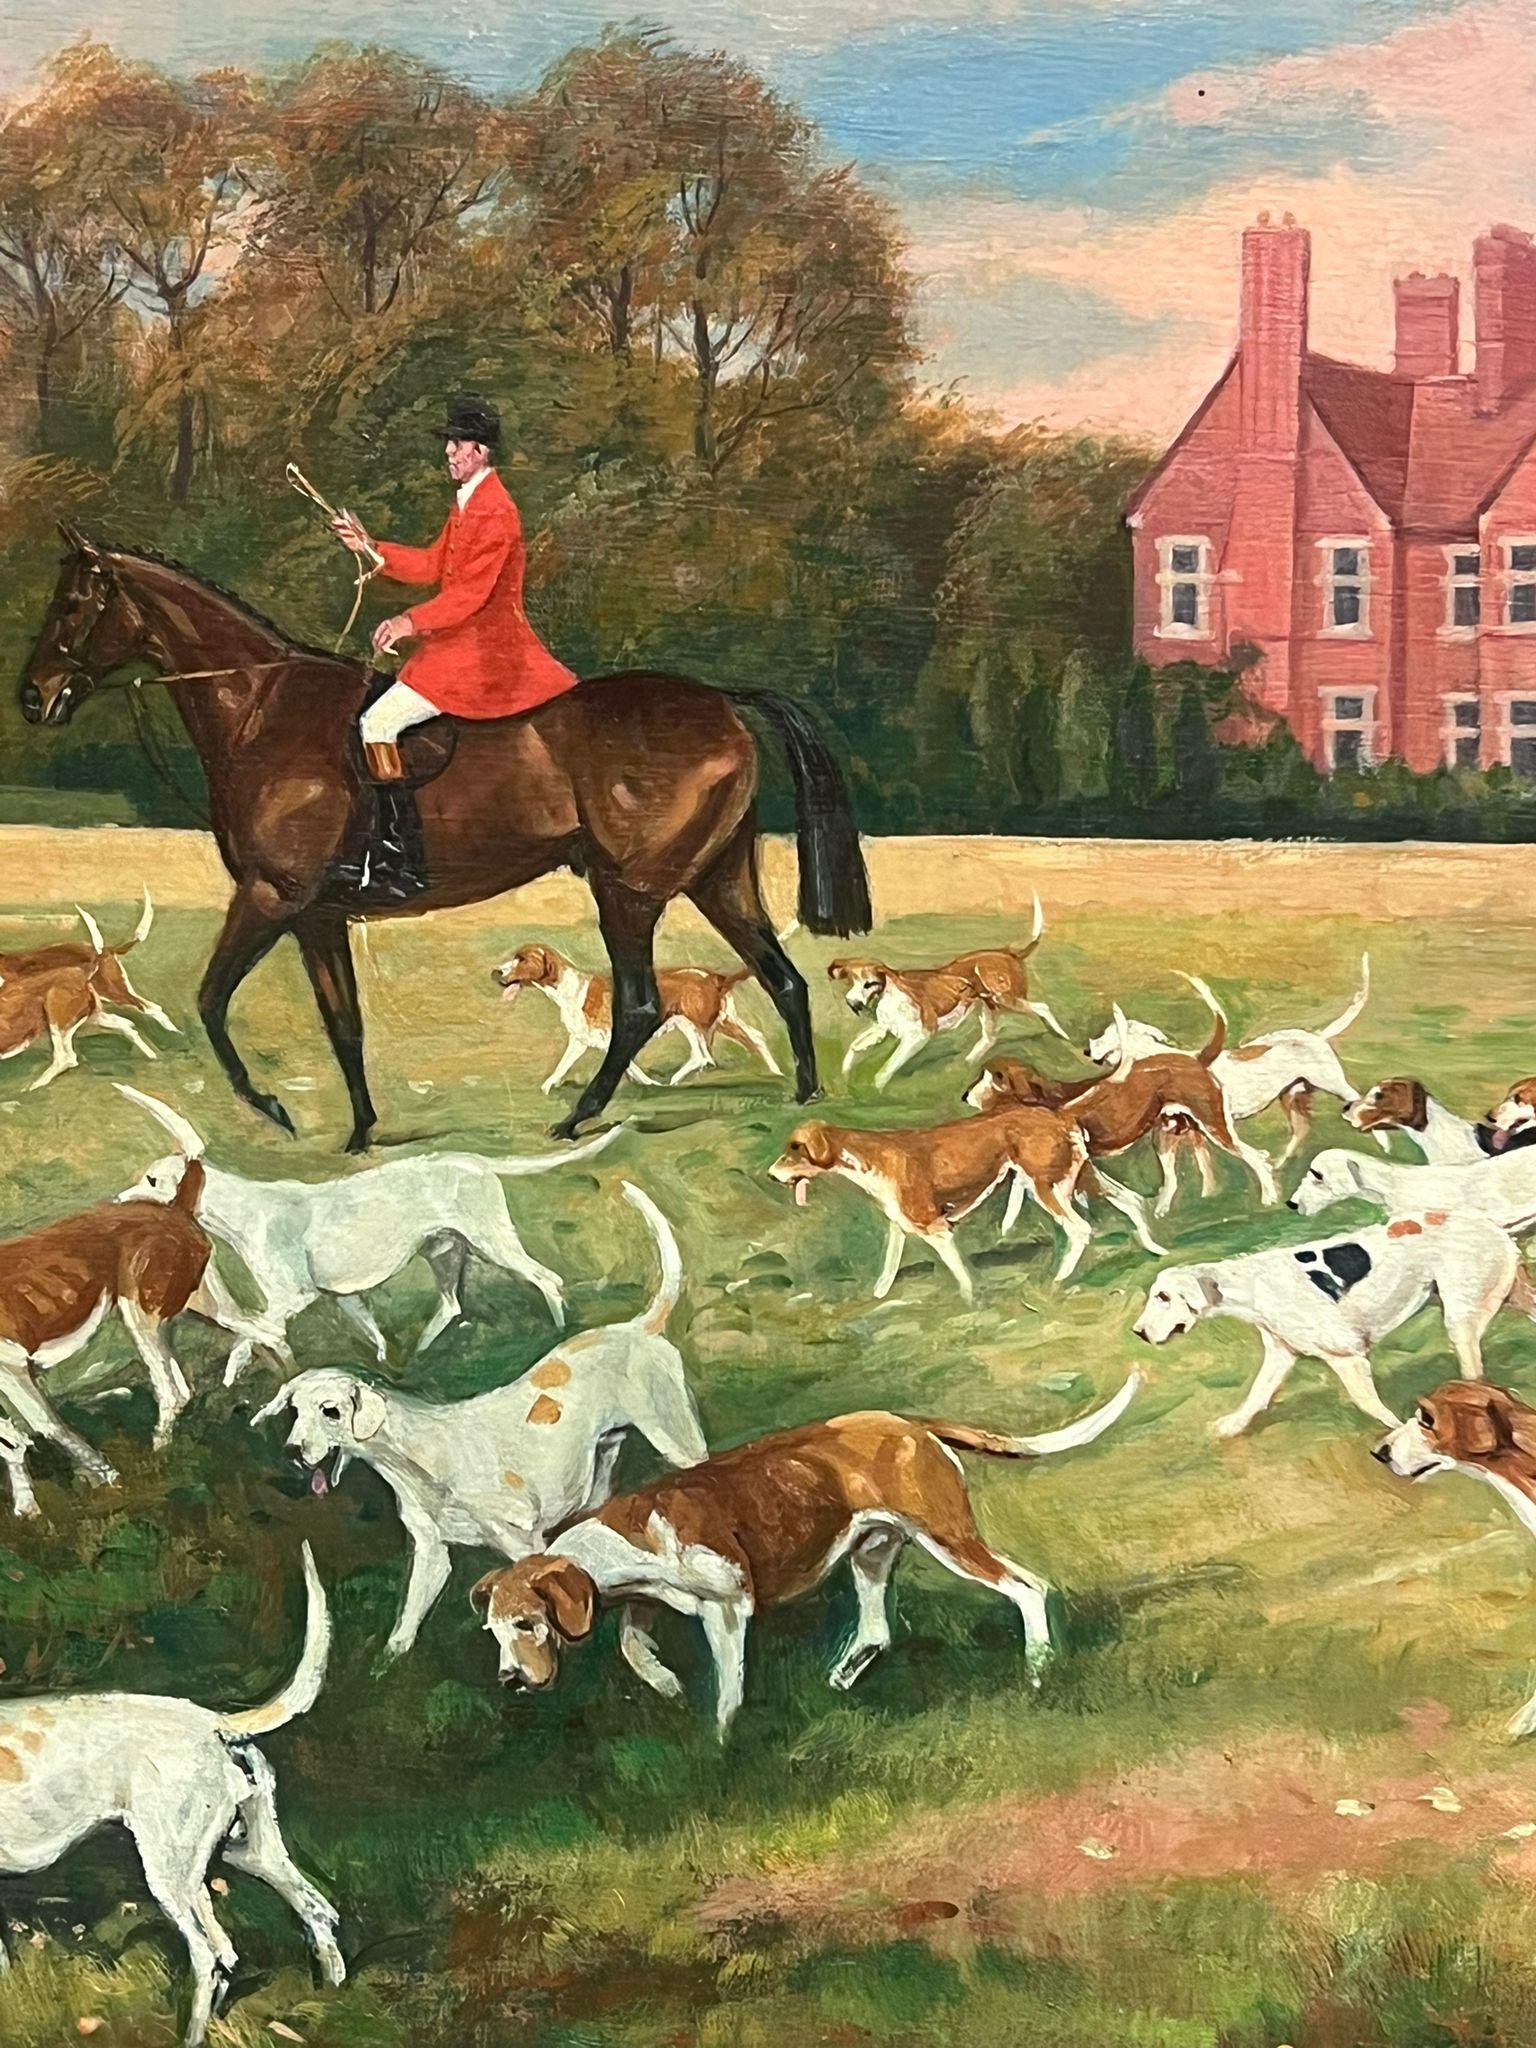 Huge British Sporting Art Oil Painting Hunting Scene Horse & Riders Before House For Sale 5